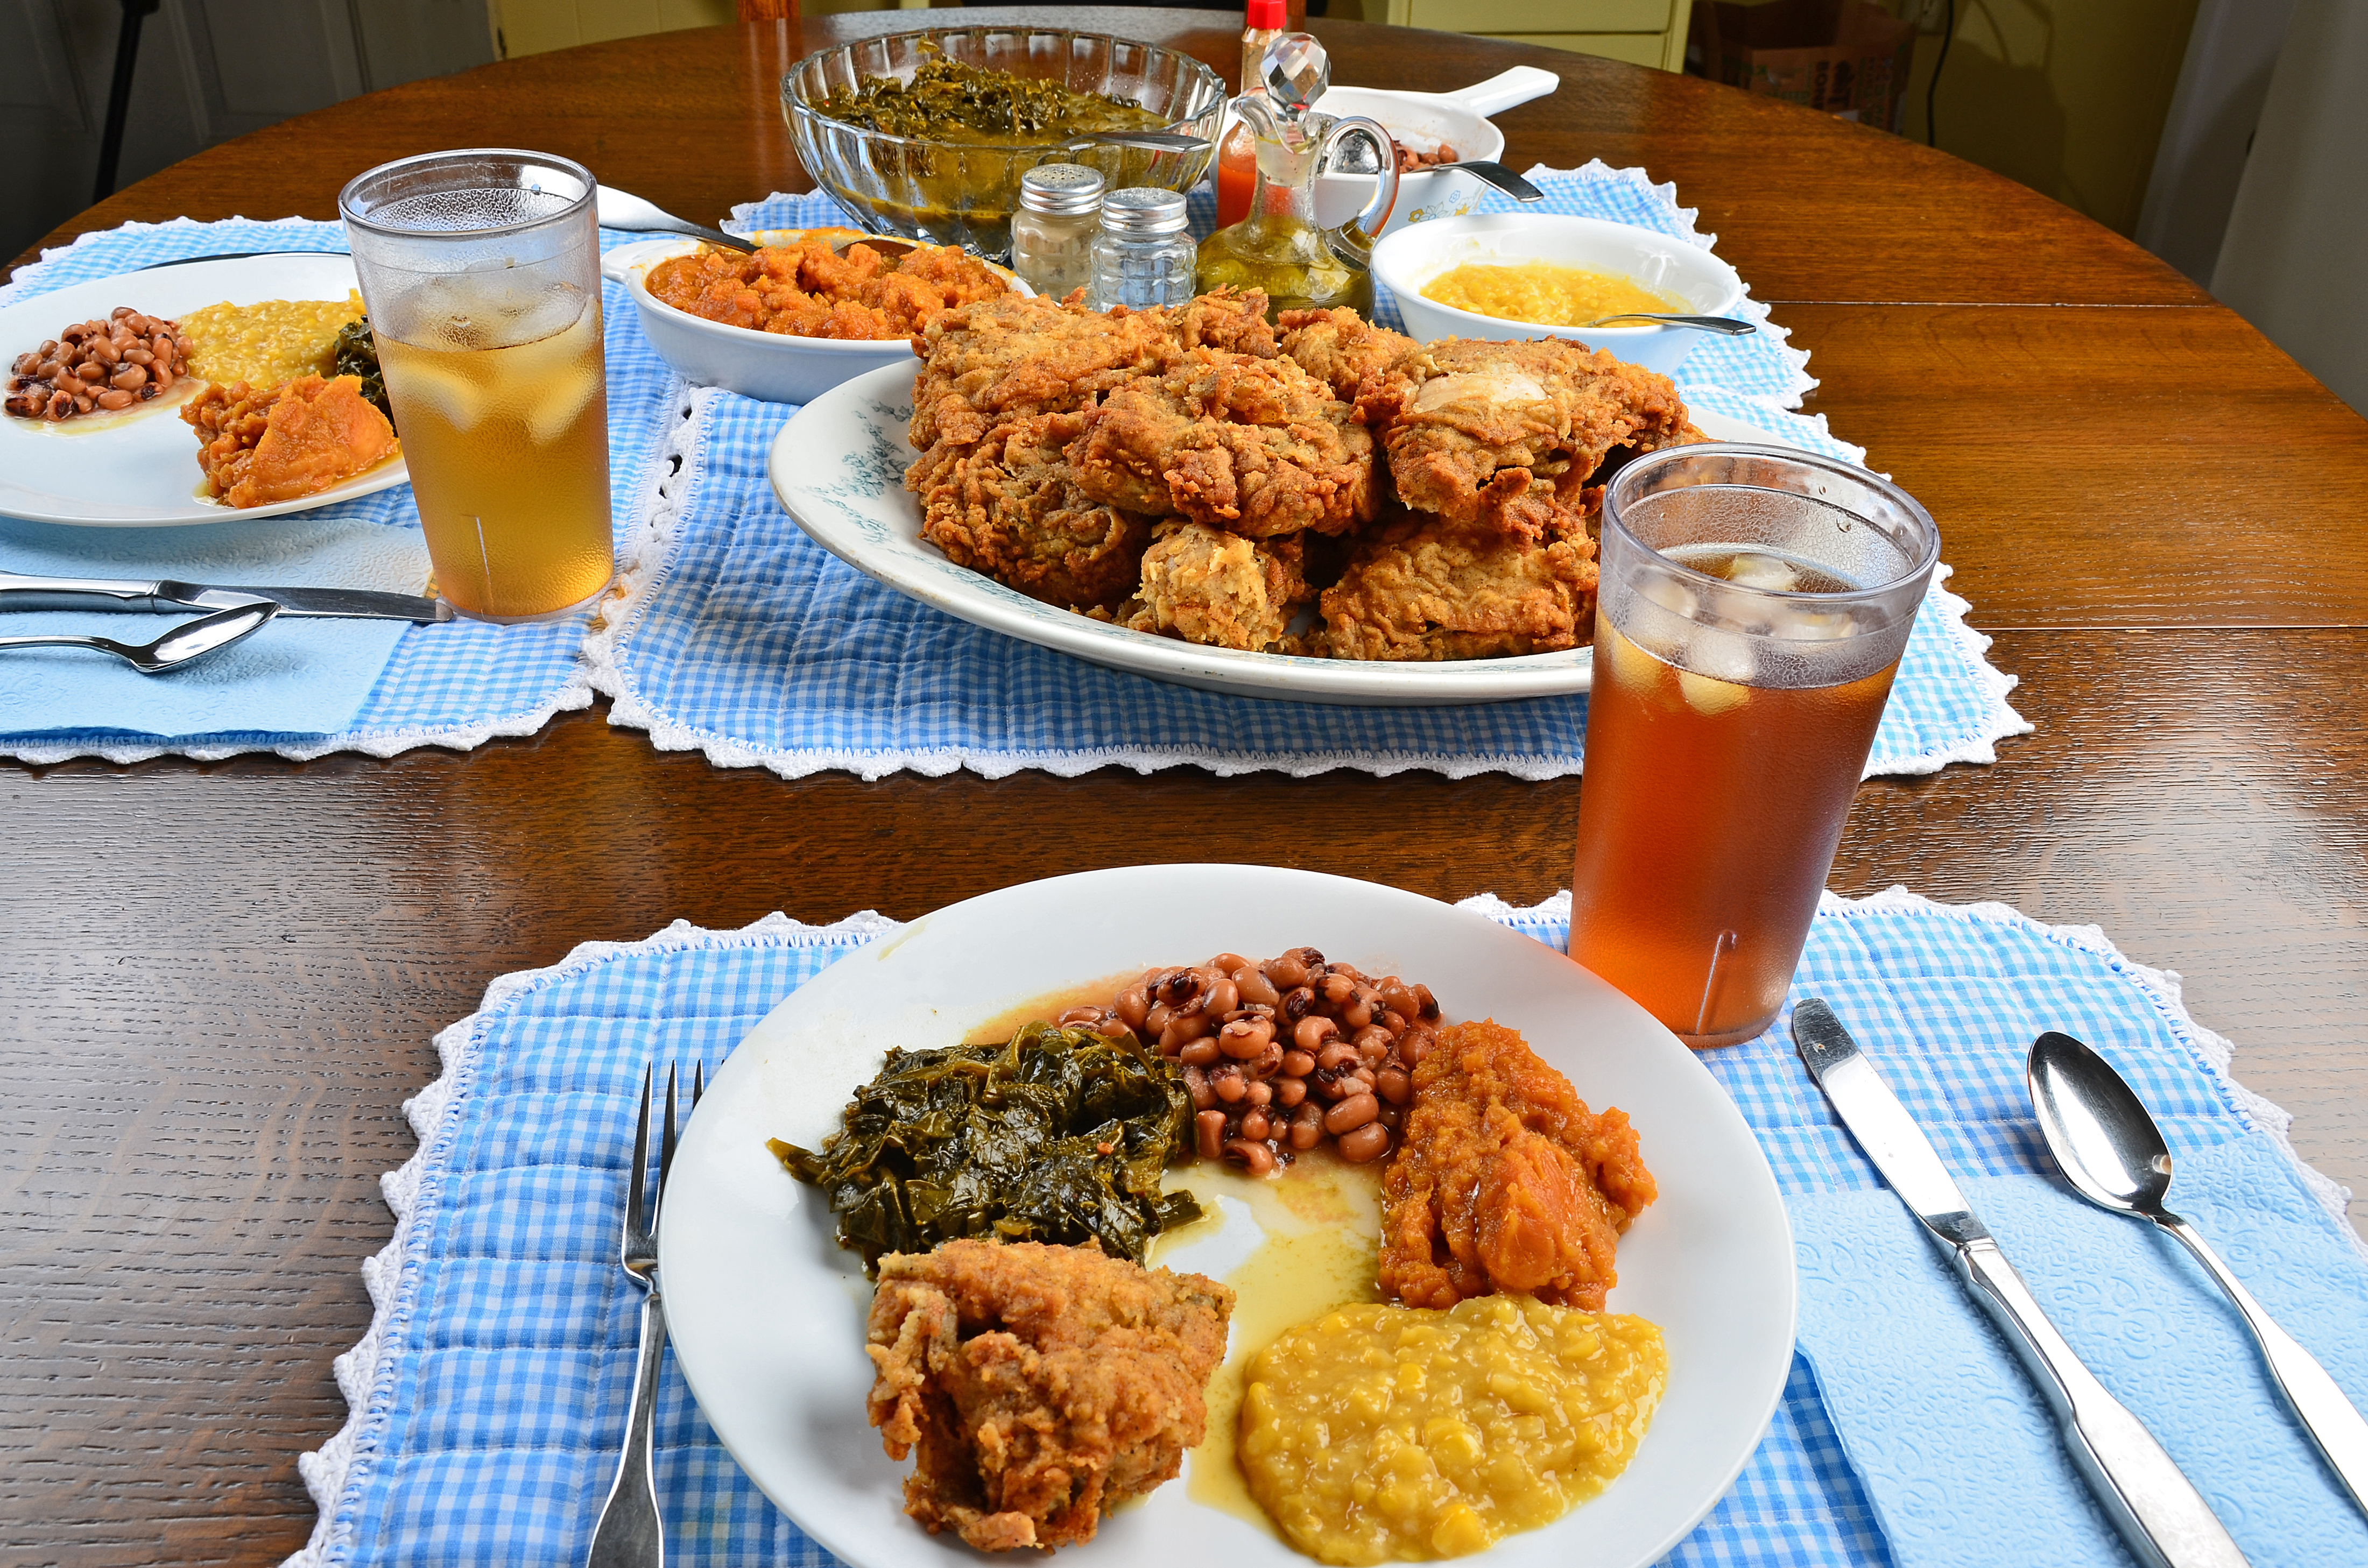 Black-Eyed Pea, Blue Gingham, Candied Yams, Collard Greens, Corn, Dinner, Dishware, Drink, Eating, Family Dinner, Family Style, Food, Fork, Fried Chicken, Ice Tea, Latin American Cuisine, Place Mat, Plate, Silverware, Spoon, Sweet Potato, Table, Table Knife, Wide-Angle Lens.